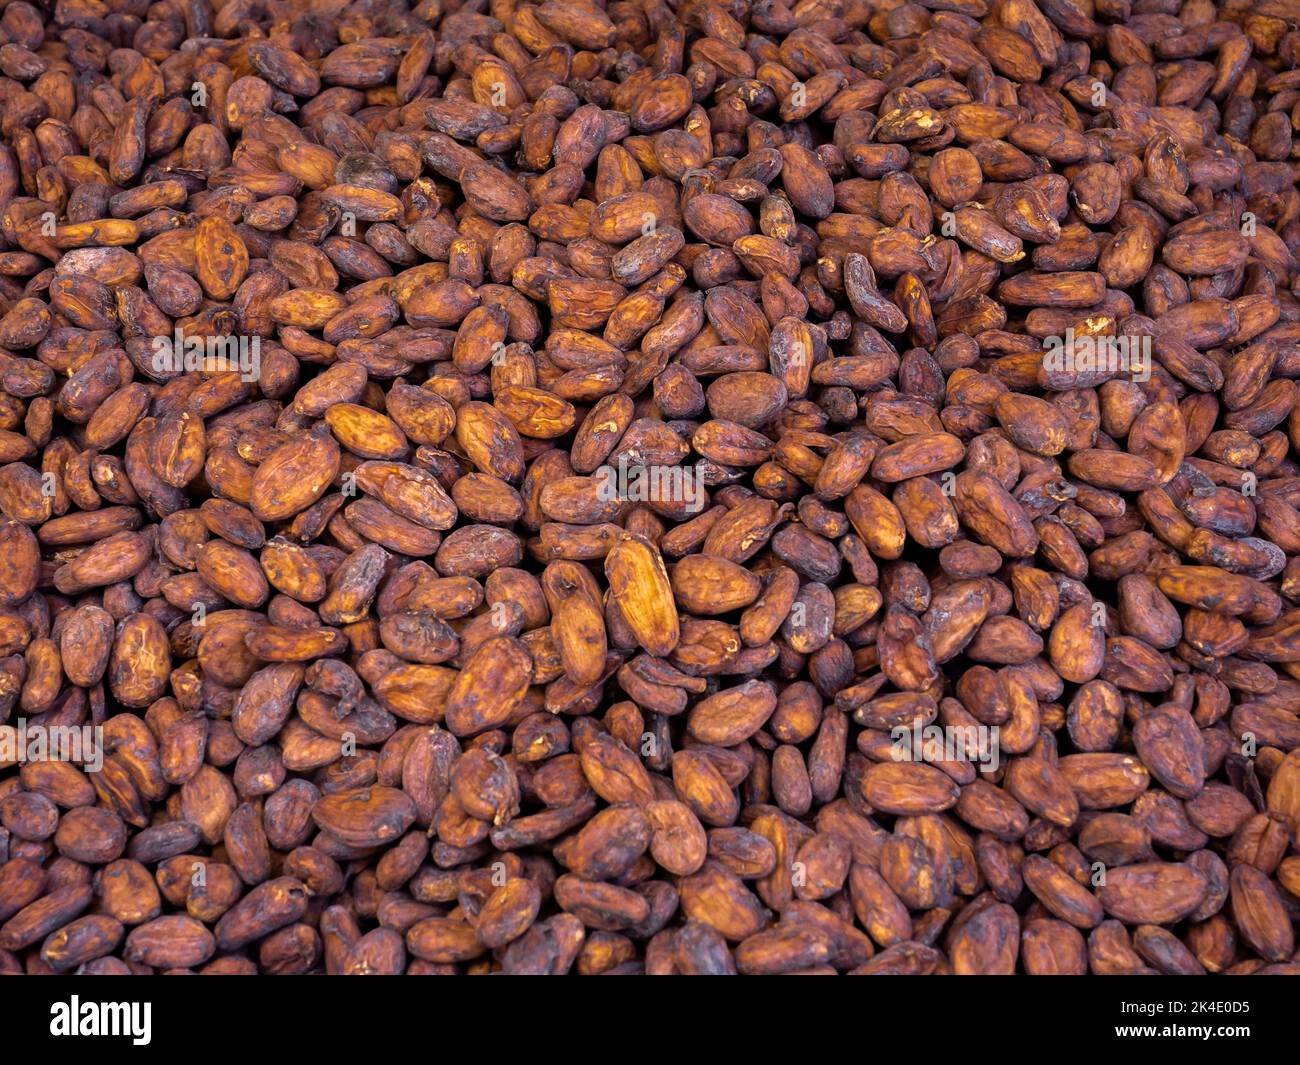 Cacao seed preparing to make chocolate. Close-up pile of raw materials of aromatic natural cocoa beans background. Stock Photo